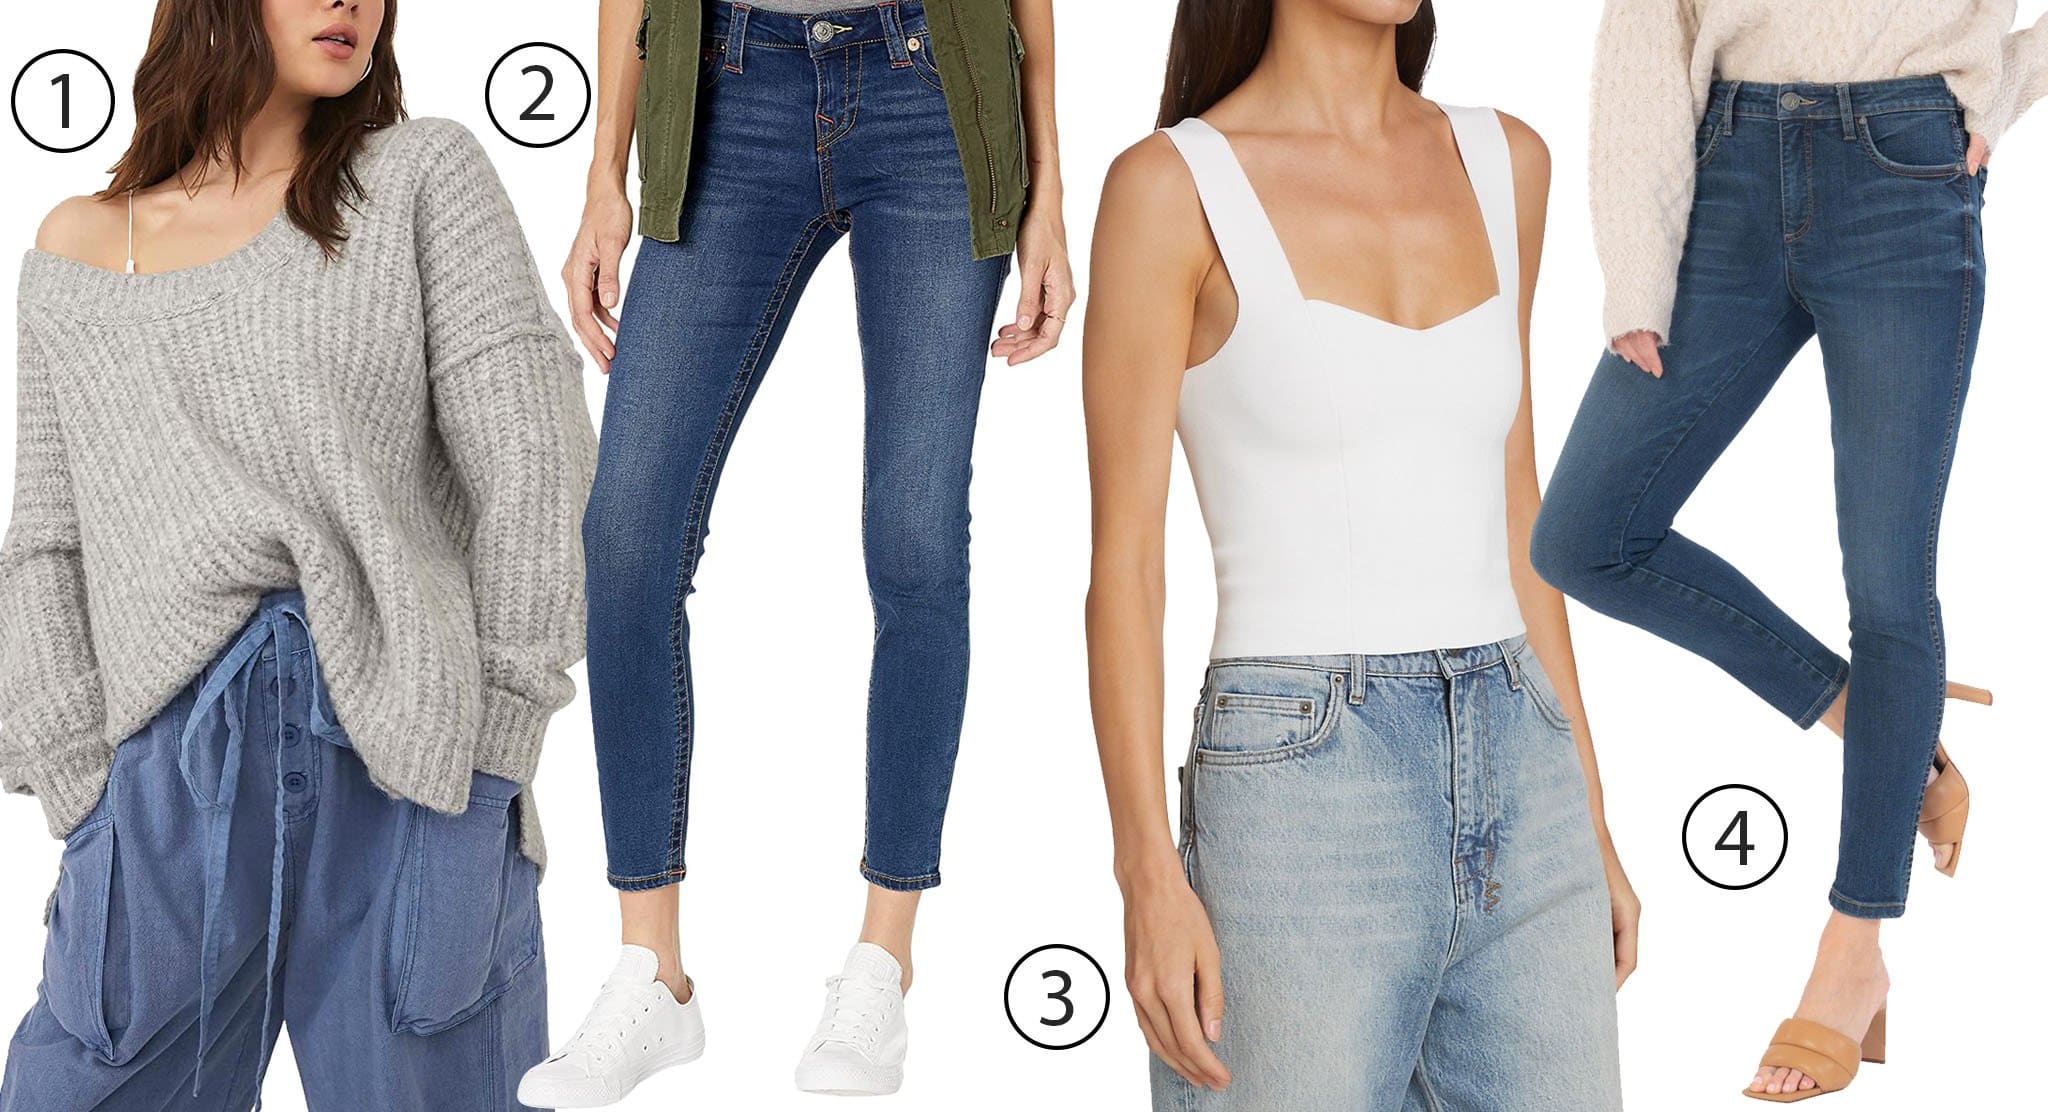 1. Free People Blue Bell V-Neck Sweater 2. True Religion Stella Low Rise Skinny Jeans 3. A.L.C. Jordana Crop Top 4. Kut from the Kloth Donna Fab Ab High Waist Ankle Skinny Jeans